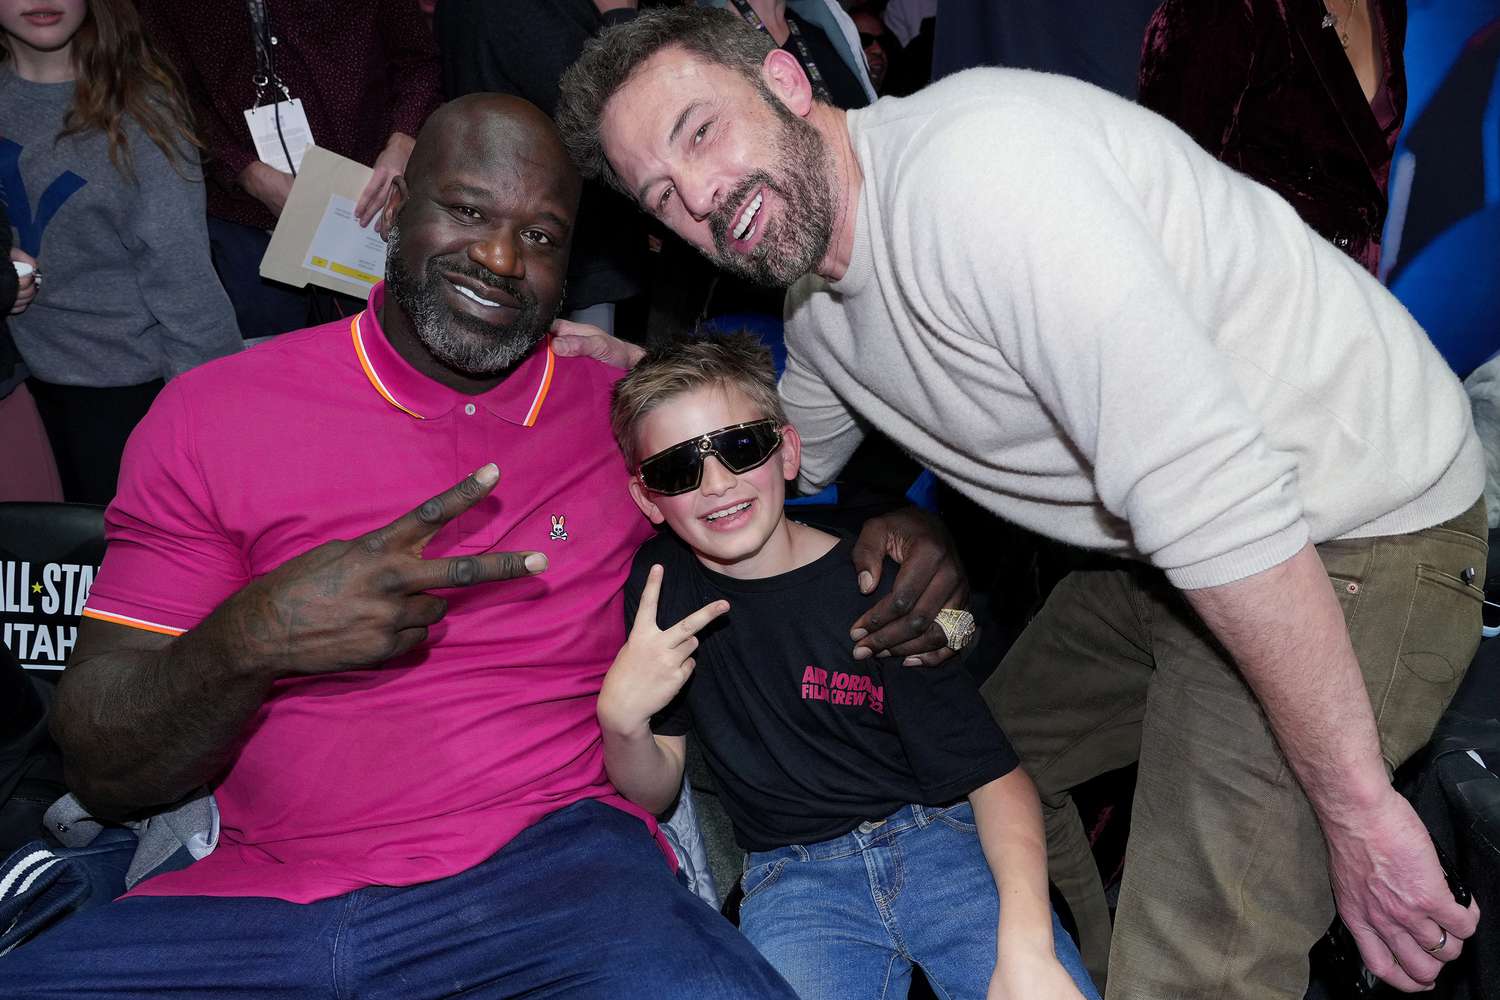 Shaquille O'Neal, Samuel Garner Affleck, and Ben Affleck attend the Ruffles Celebrity Game during the 2023 NBA All-Star Weekend at Vivint Arena on February 17, 2023 in Salt Lake City, Utah.